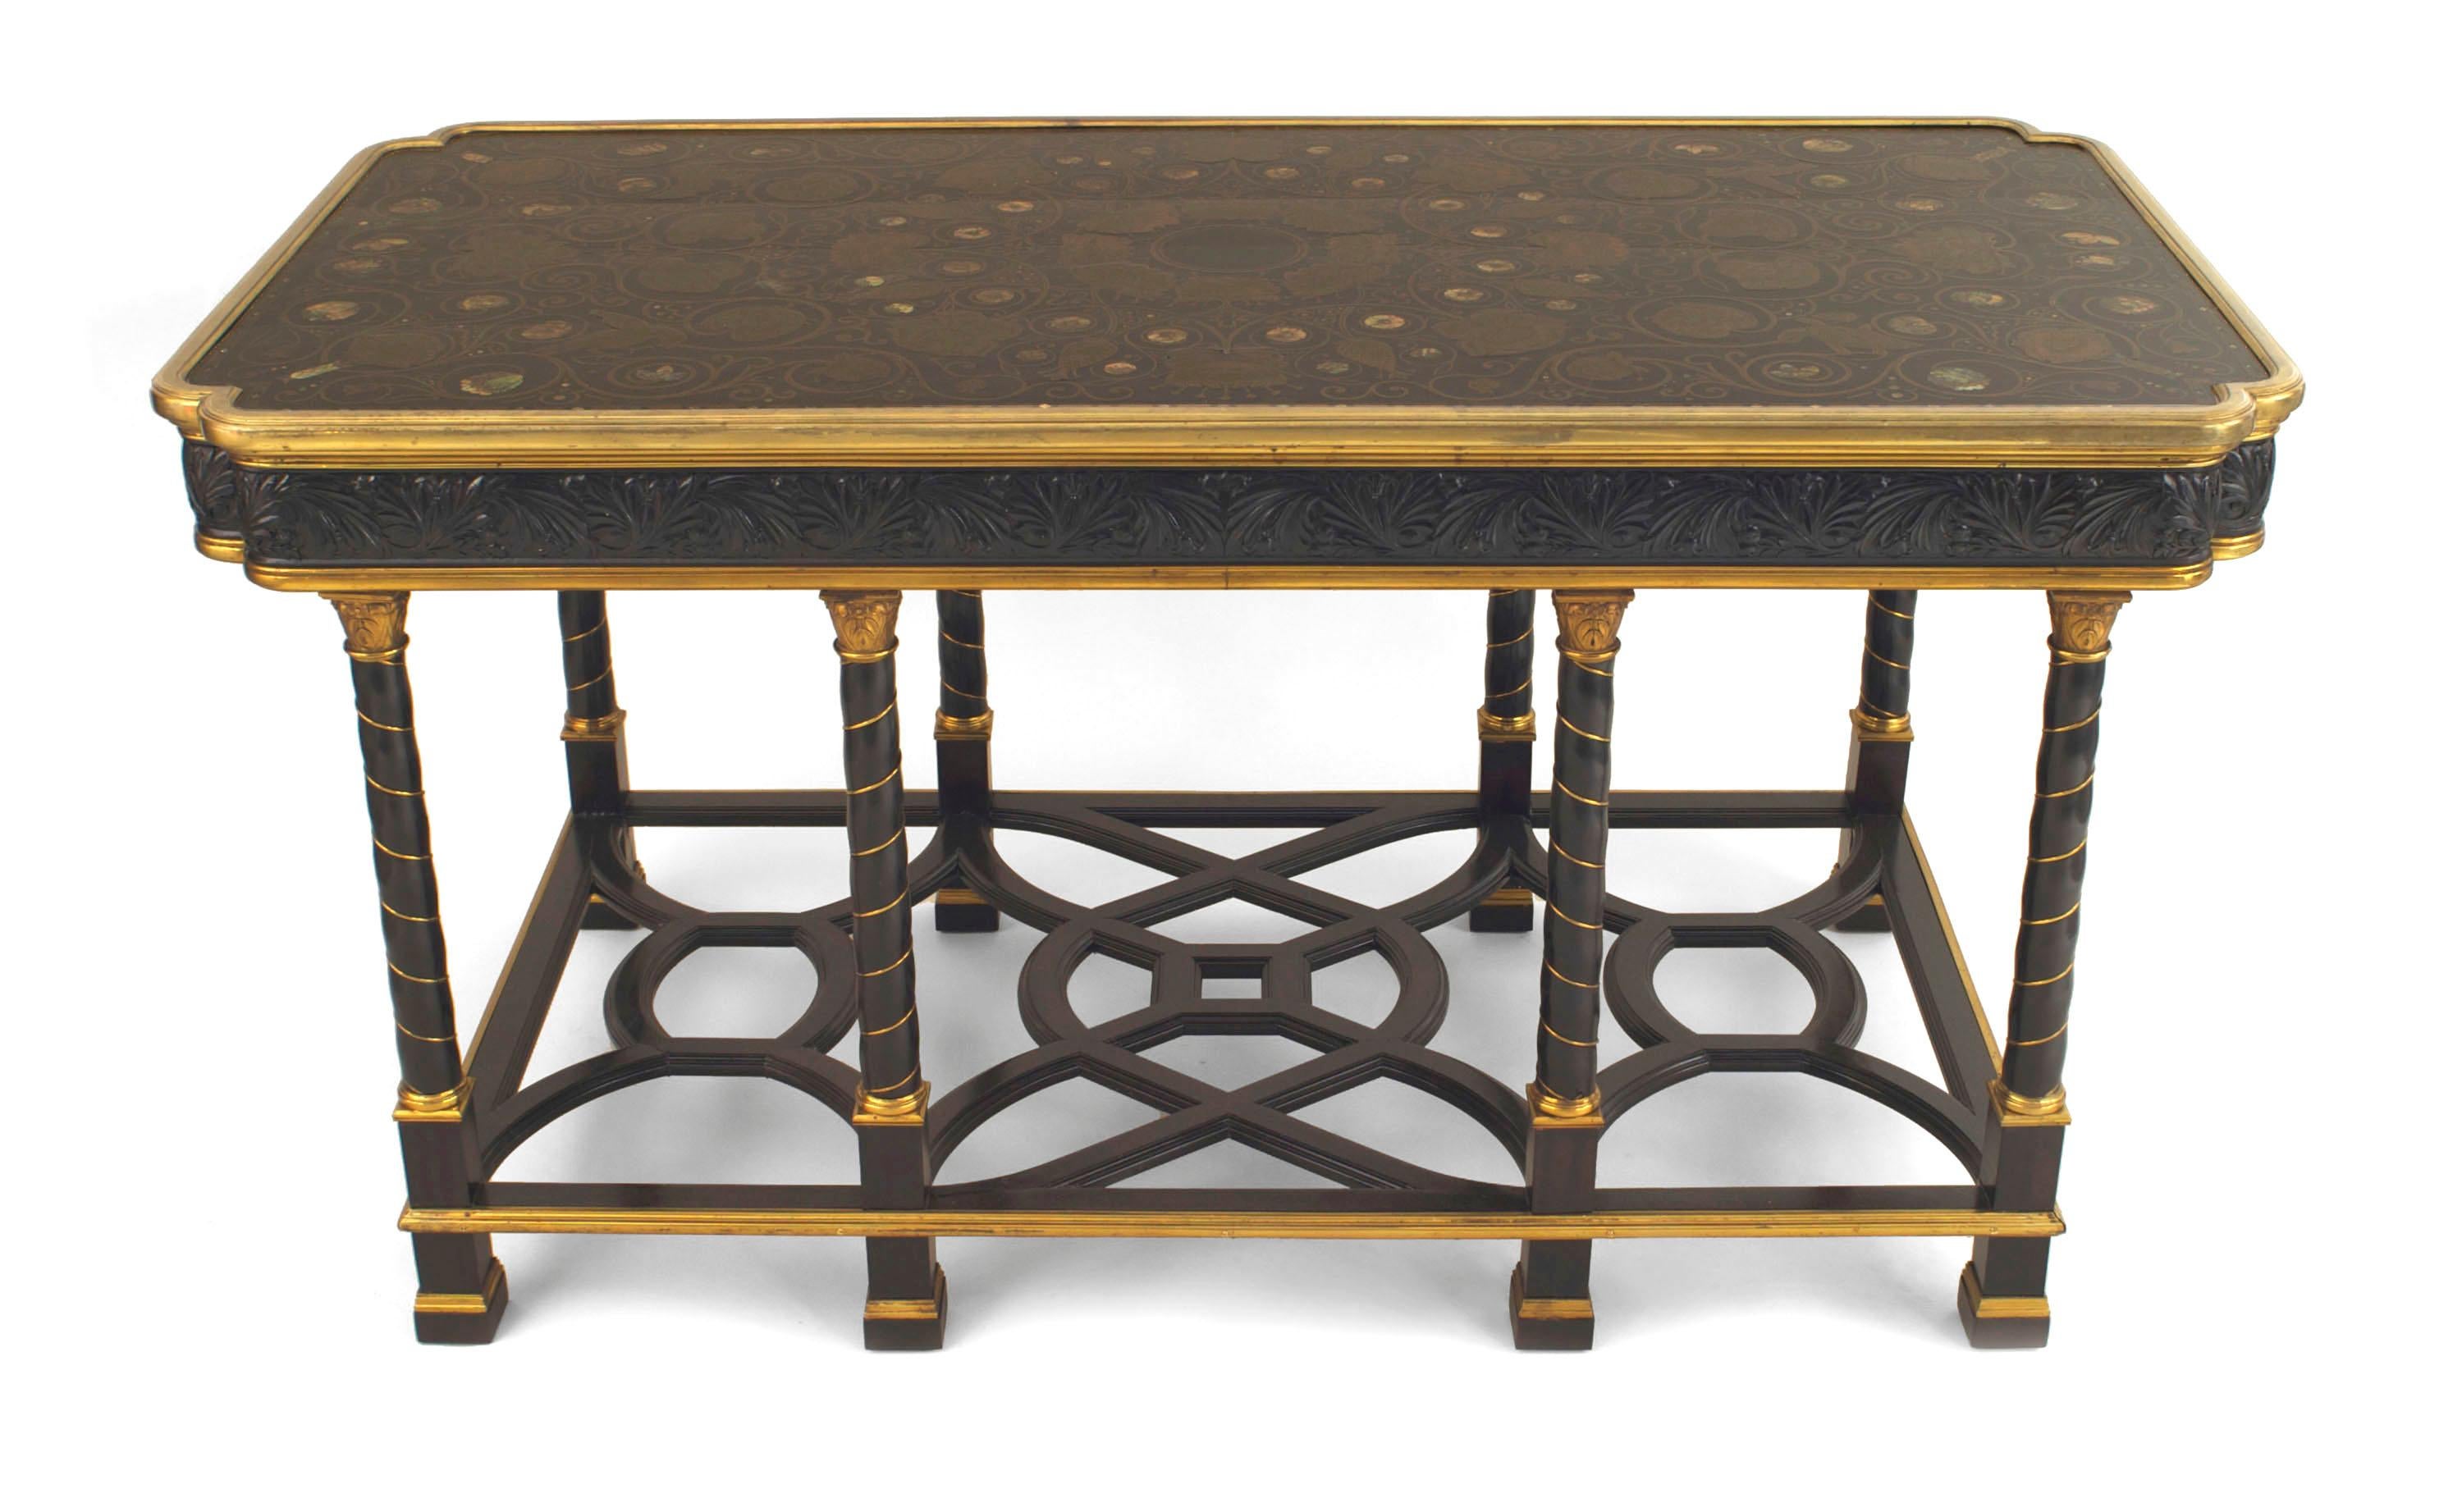 French Victorian (19/20th Century) ebony and bronze rectangular center table with 8 swirl design legs connected with an open geometric design stretcher and a top inlaid with pearl & brass floral & animal designs.
